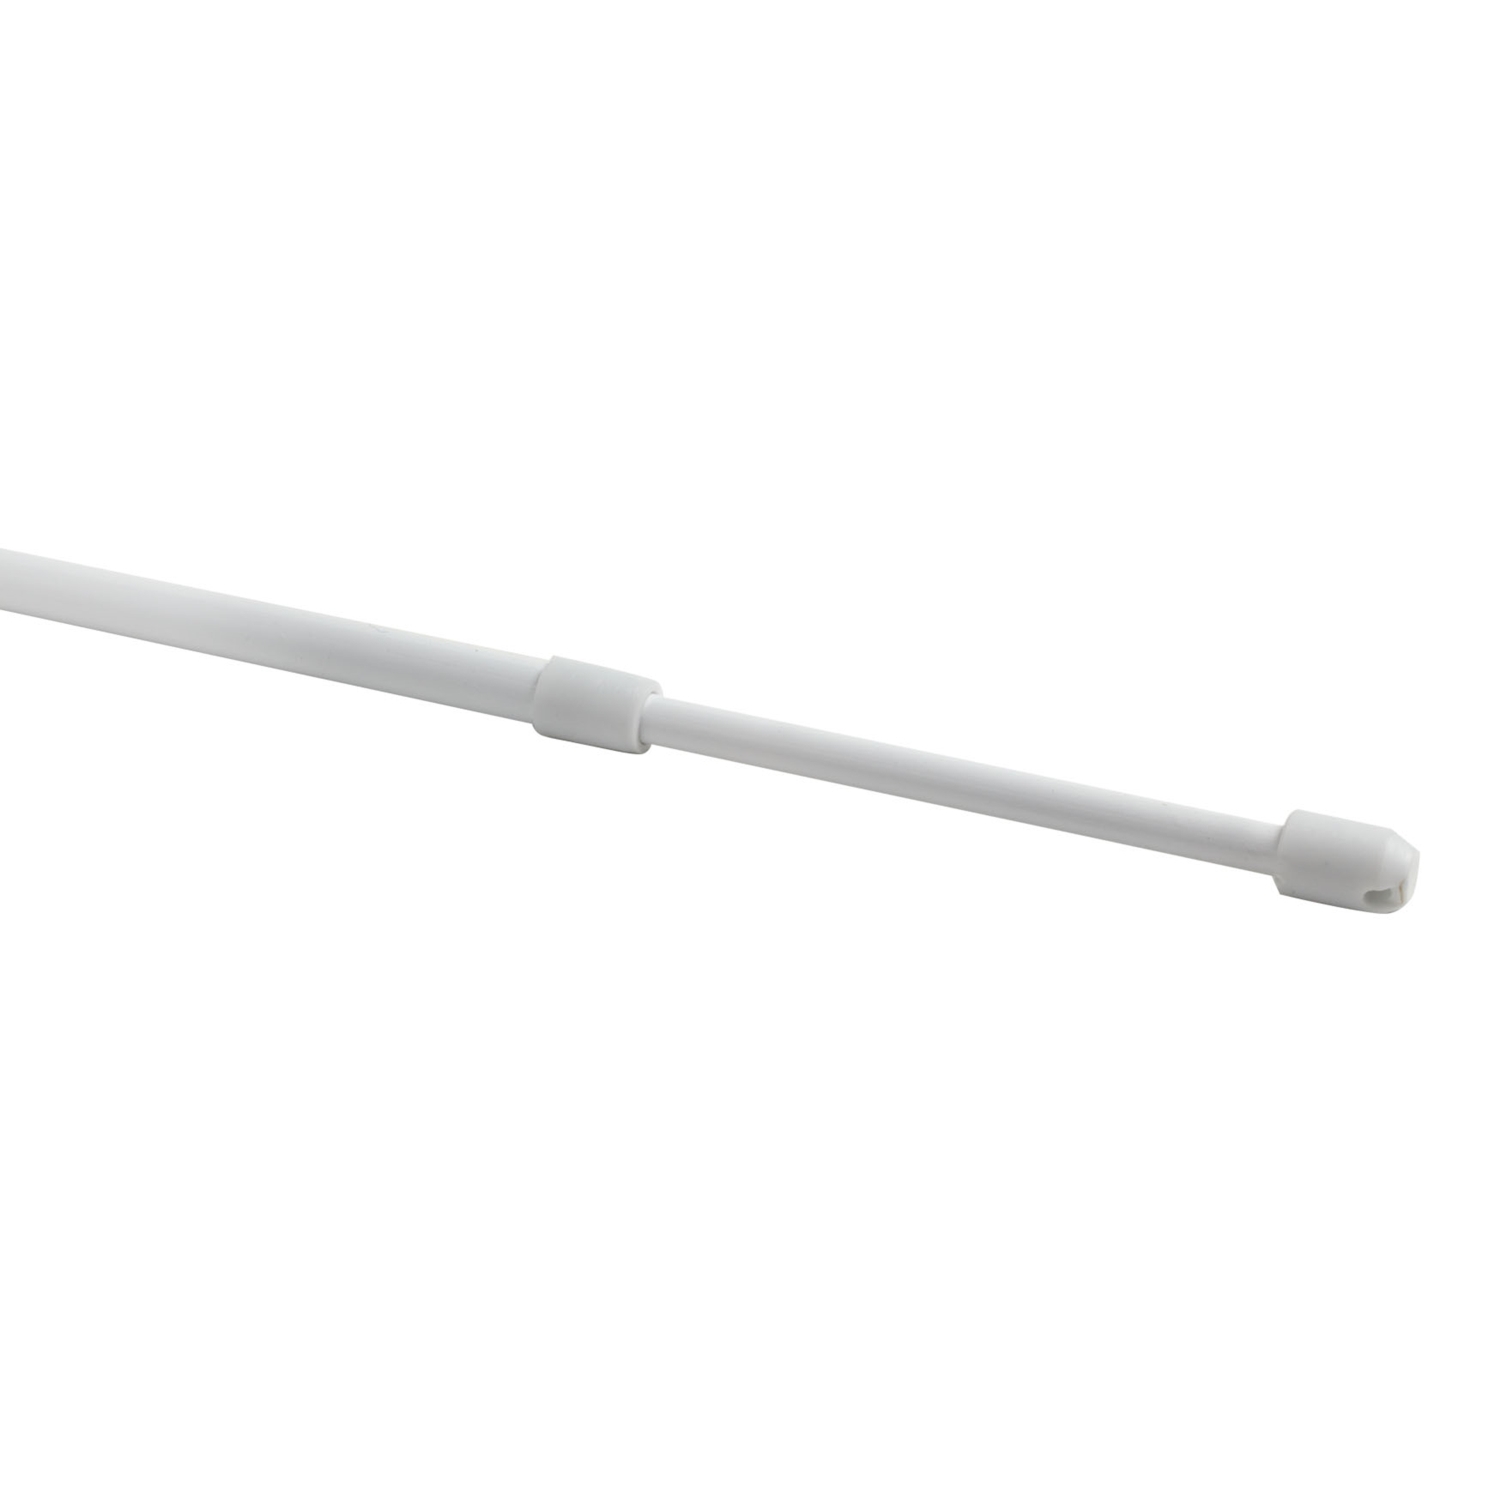 Simply  60-100cm Extendable White Net Cafe Rod Image